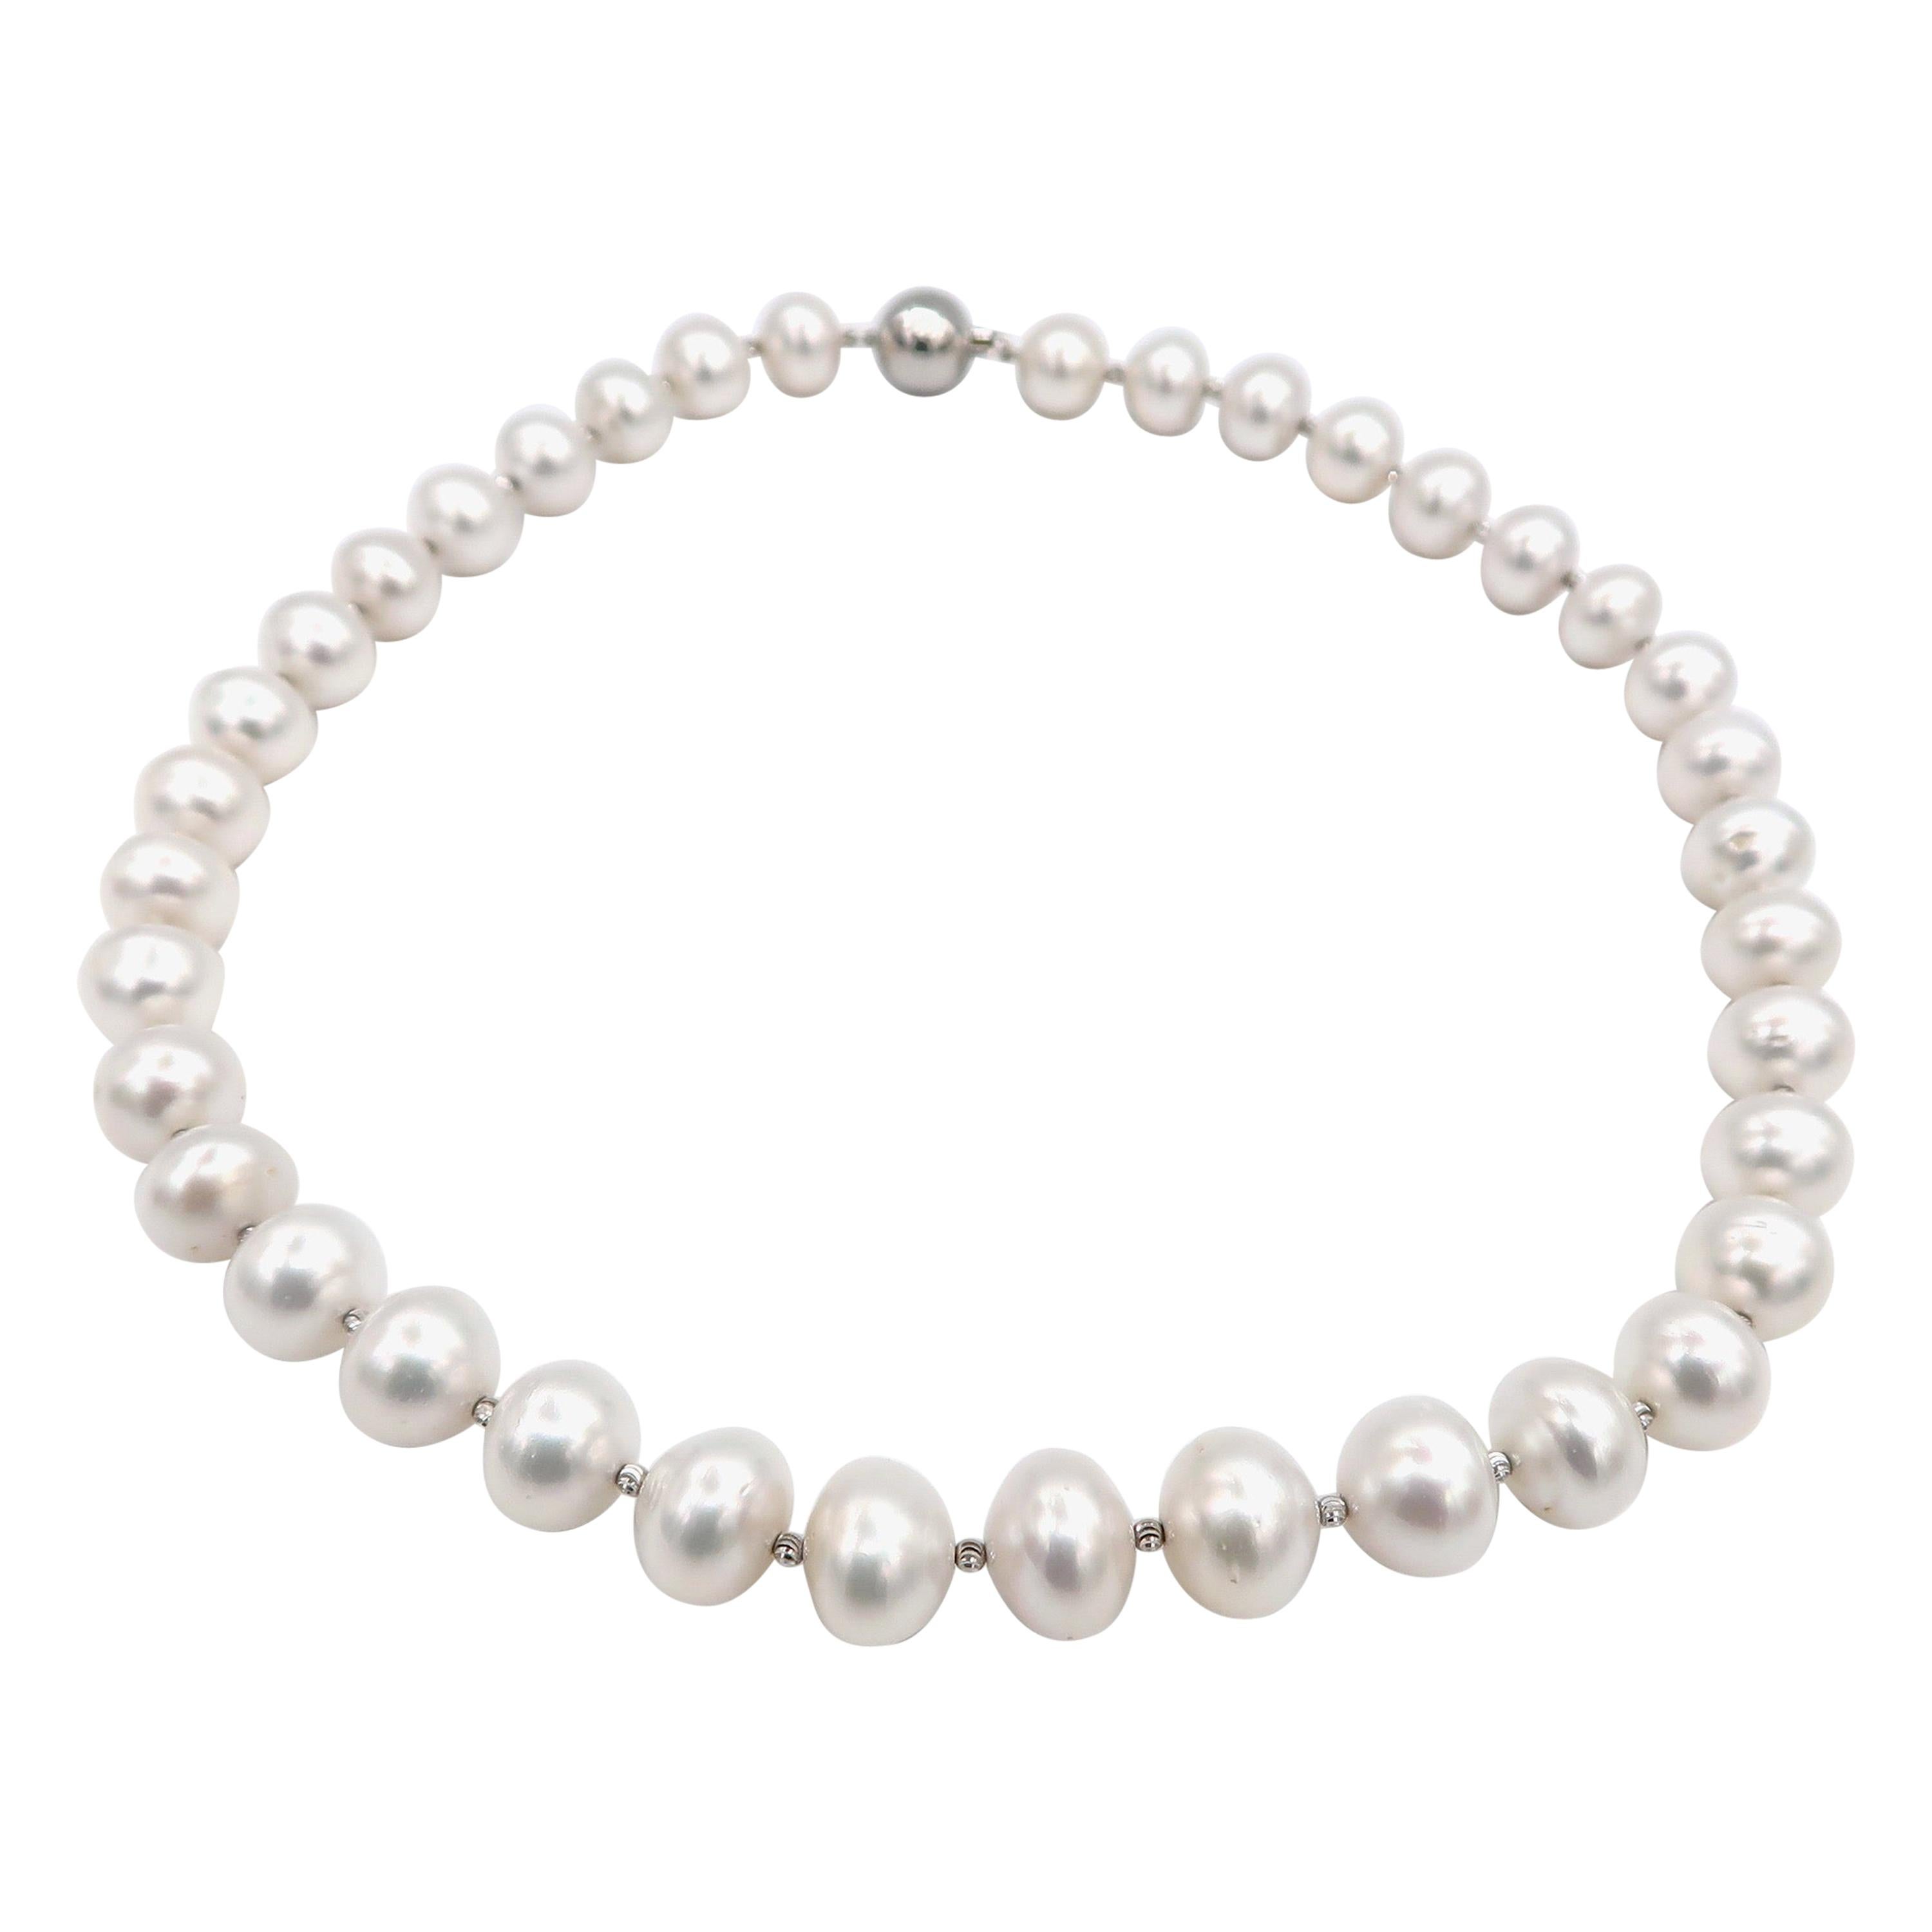 Button White South Sea Pearl Necklace with Faceted 18k White Gold Beads For Sale